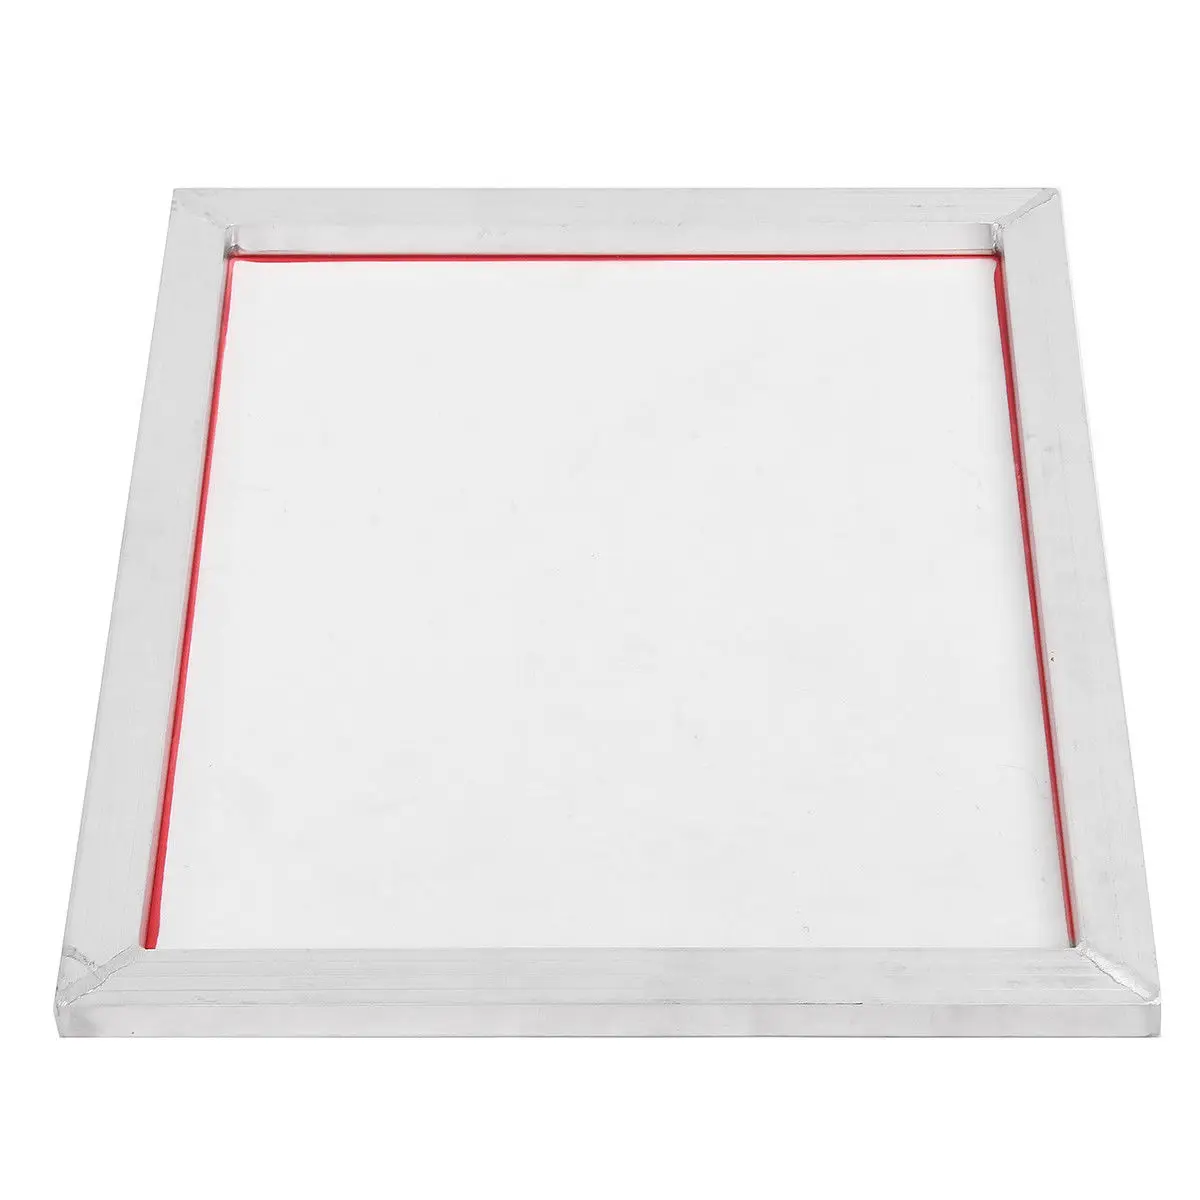 Details about   2x Screen Printing Frame Aluminum Polyester for Printed Circuit Boards 120T 